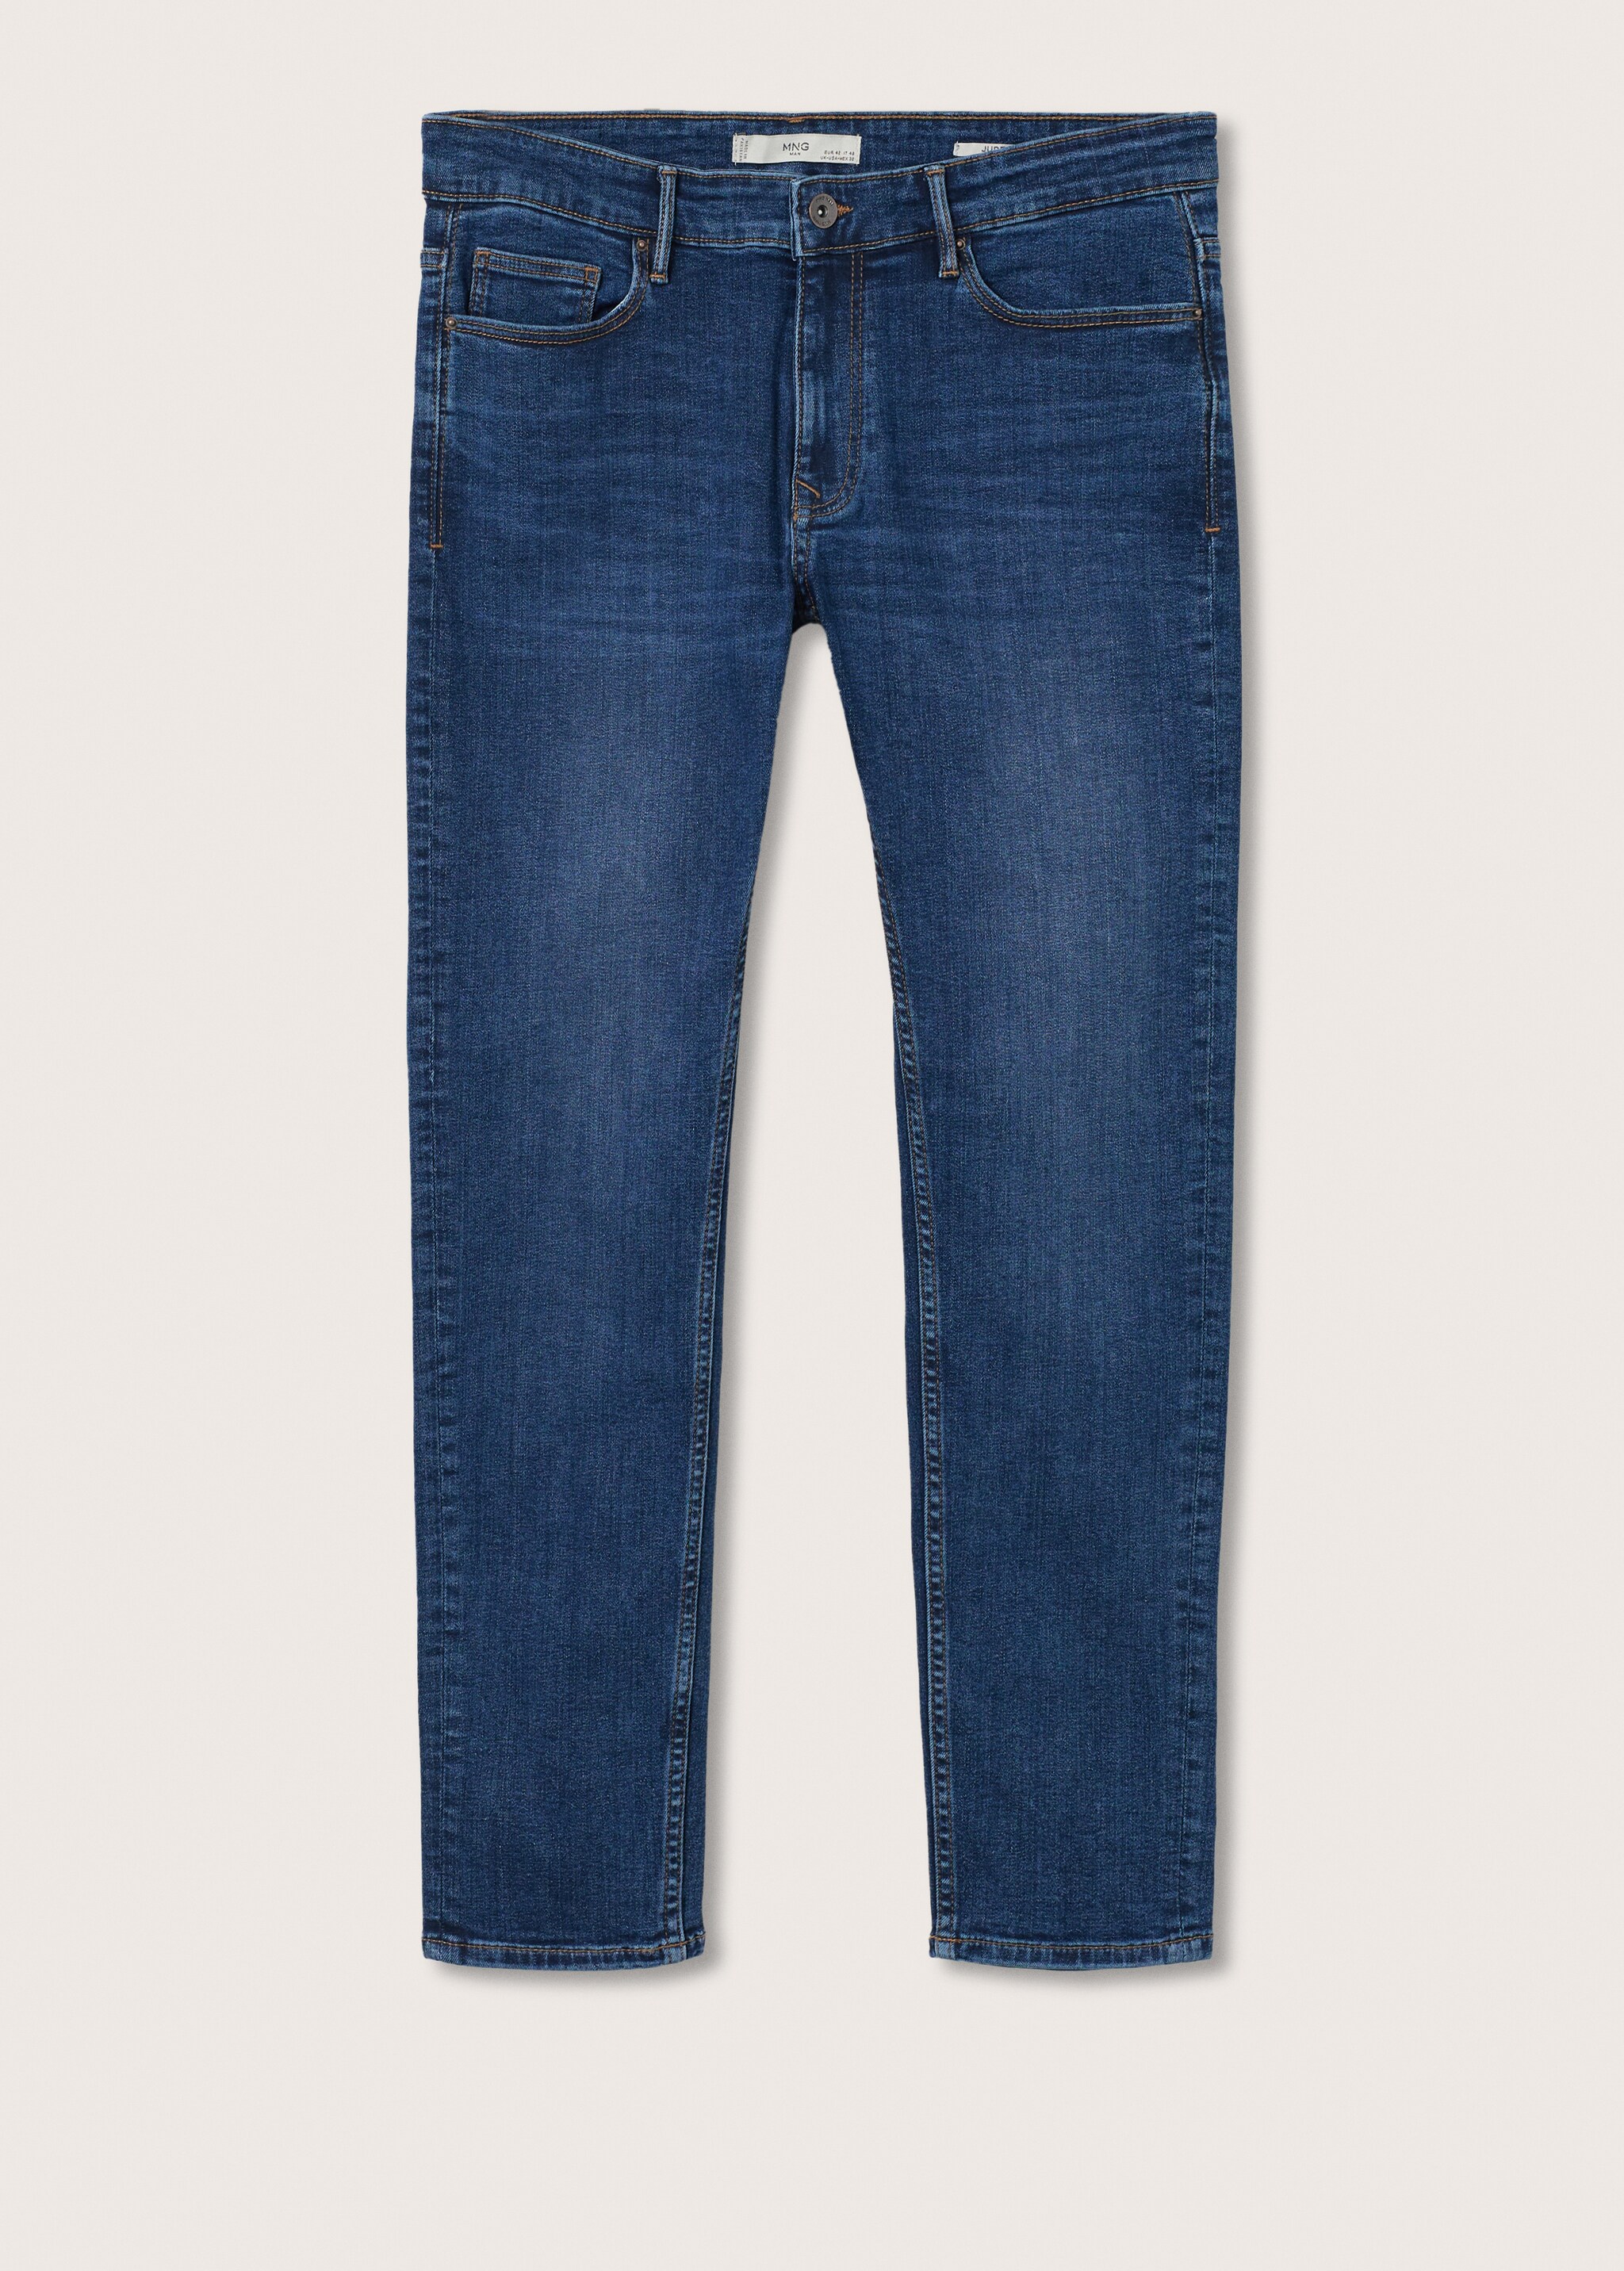 Skinny dark wash Jude jeans - Article without model